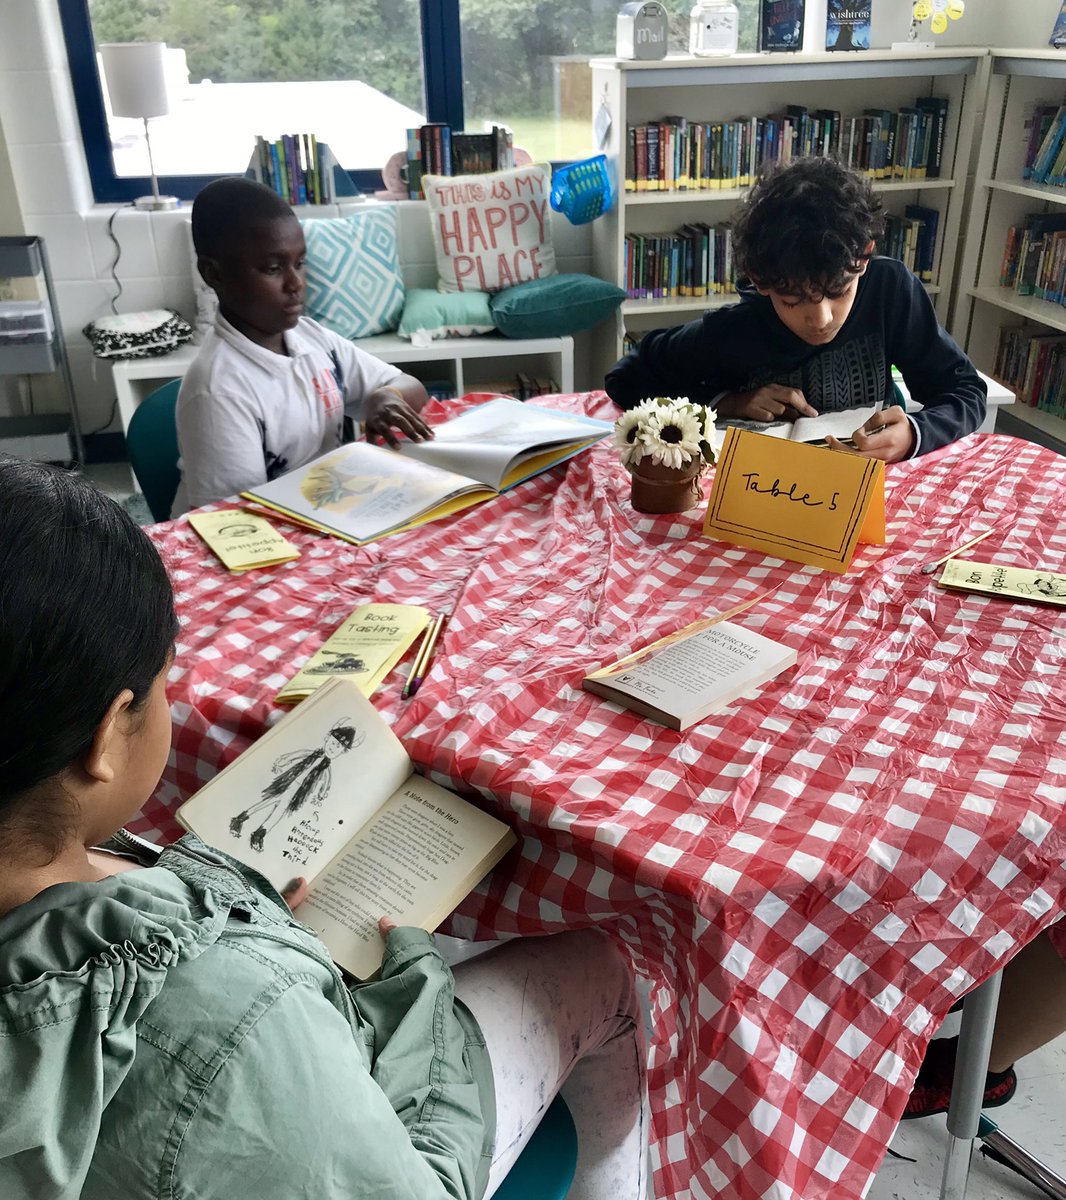 Had our classroom library book tasting today, and it was a blast! We definitely have a classroom of readers! @WoodlawnES #readingislit #growingreaders #FairfaxCounty